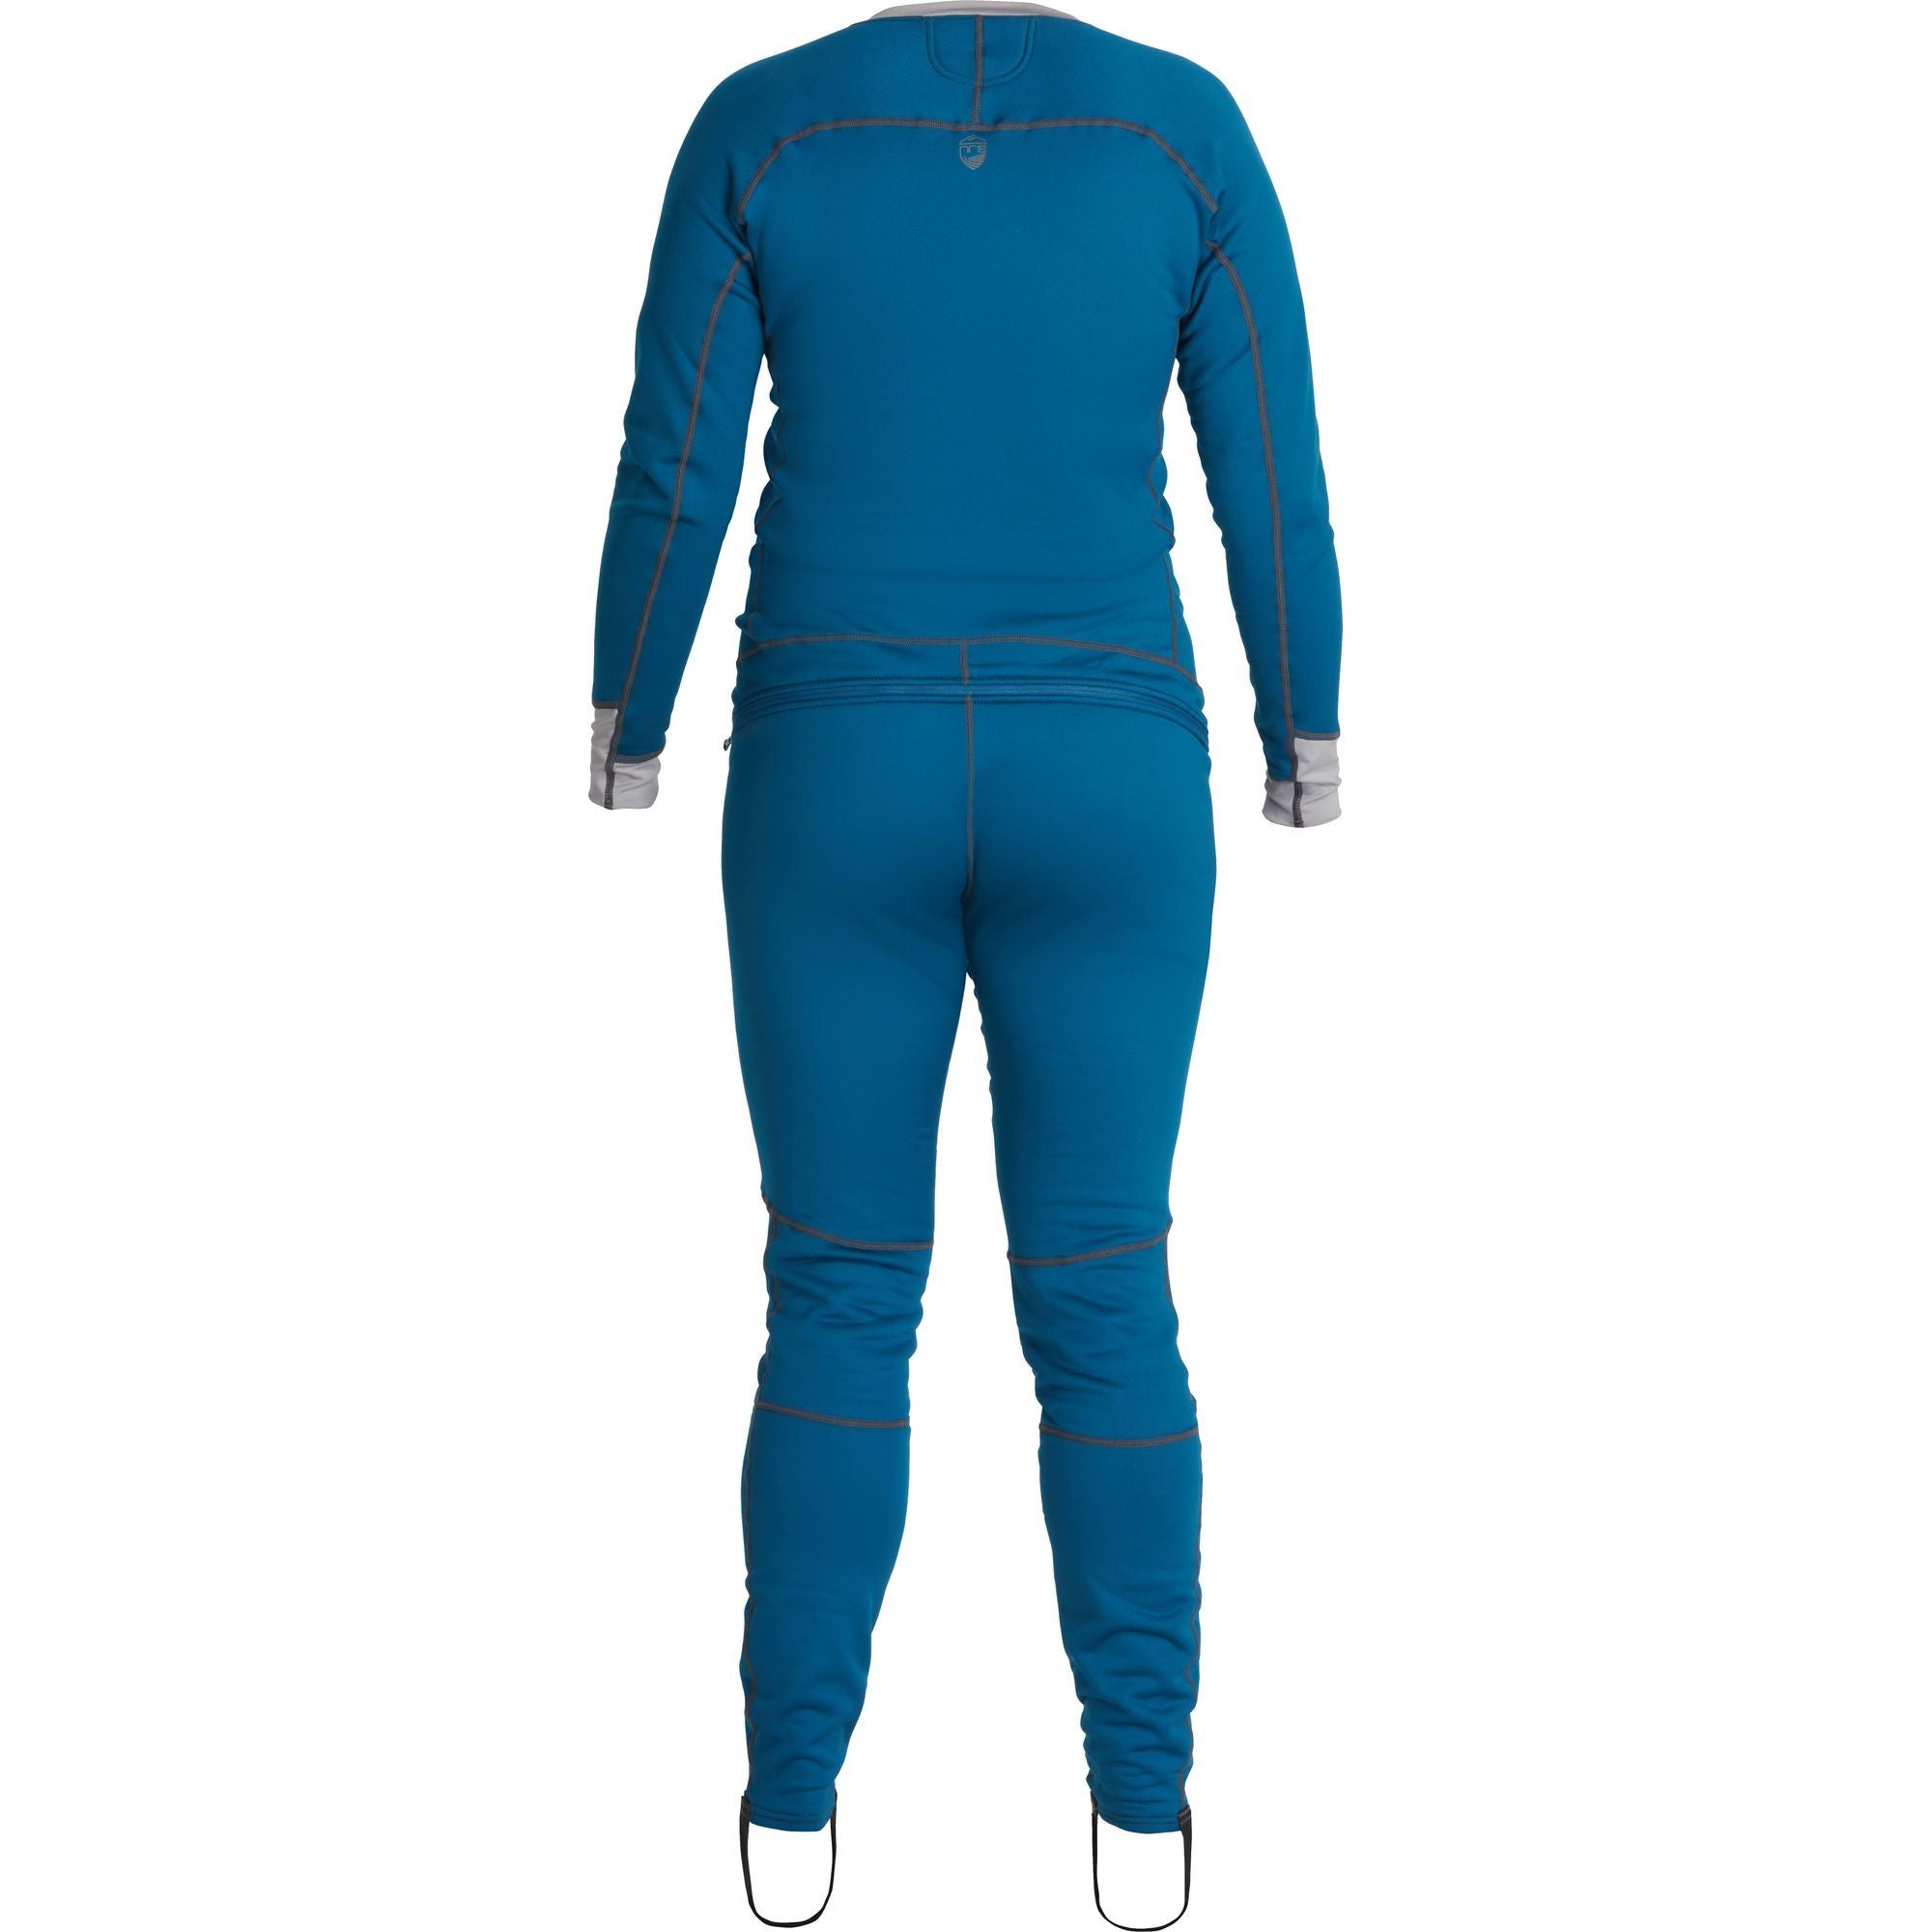 NRS Expedition Weight Union Suit, Naisten